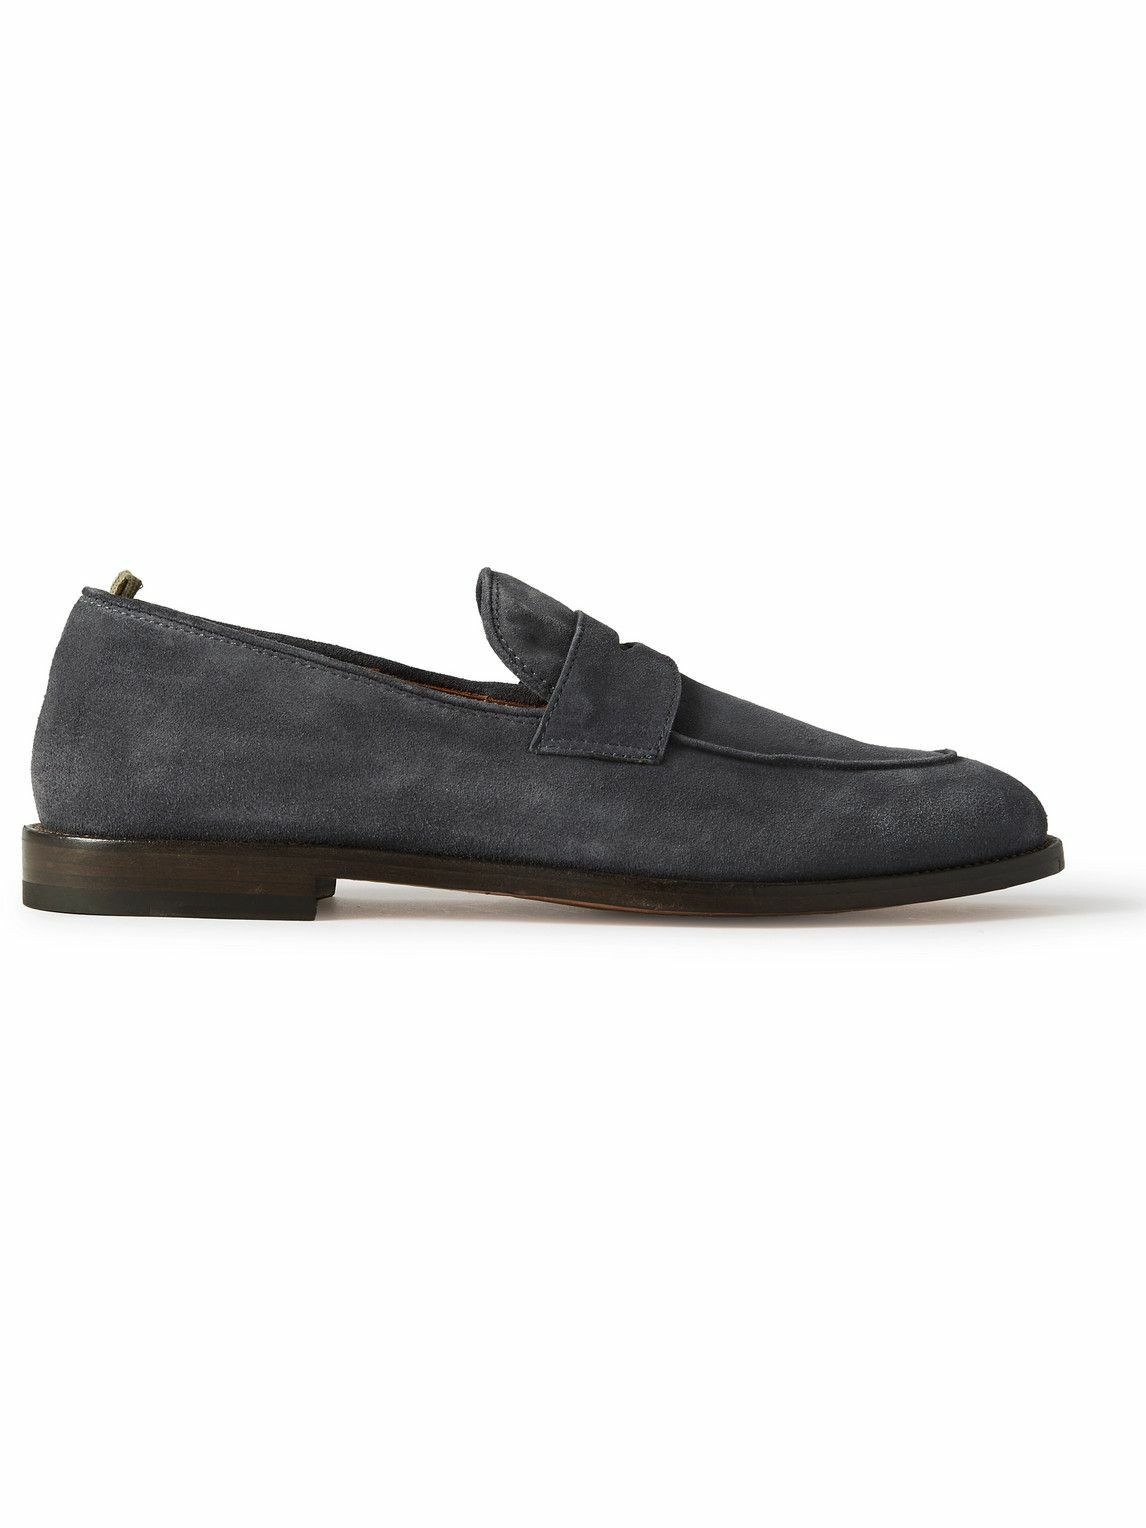 Photo: Officine Creative - Opera Suede Penny Loafers - Black